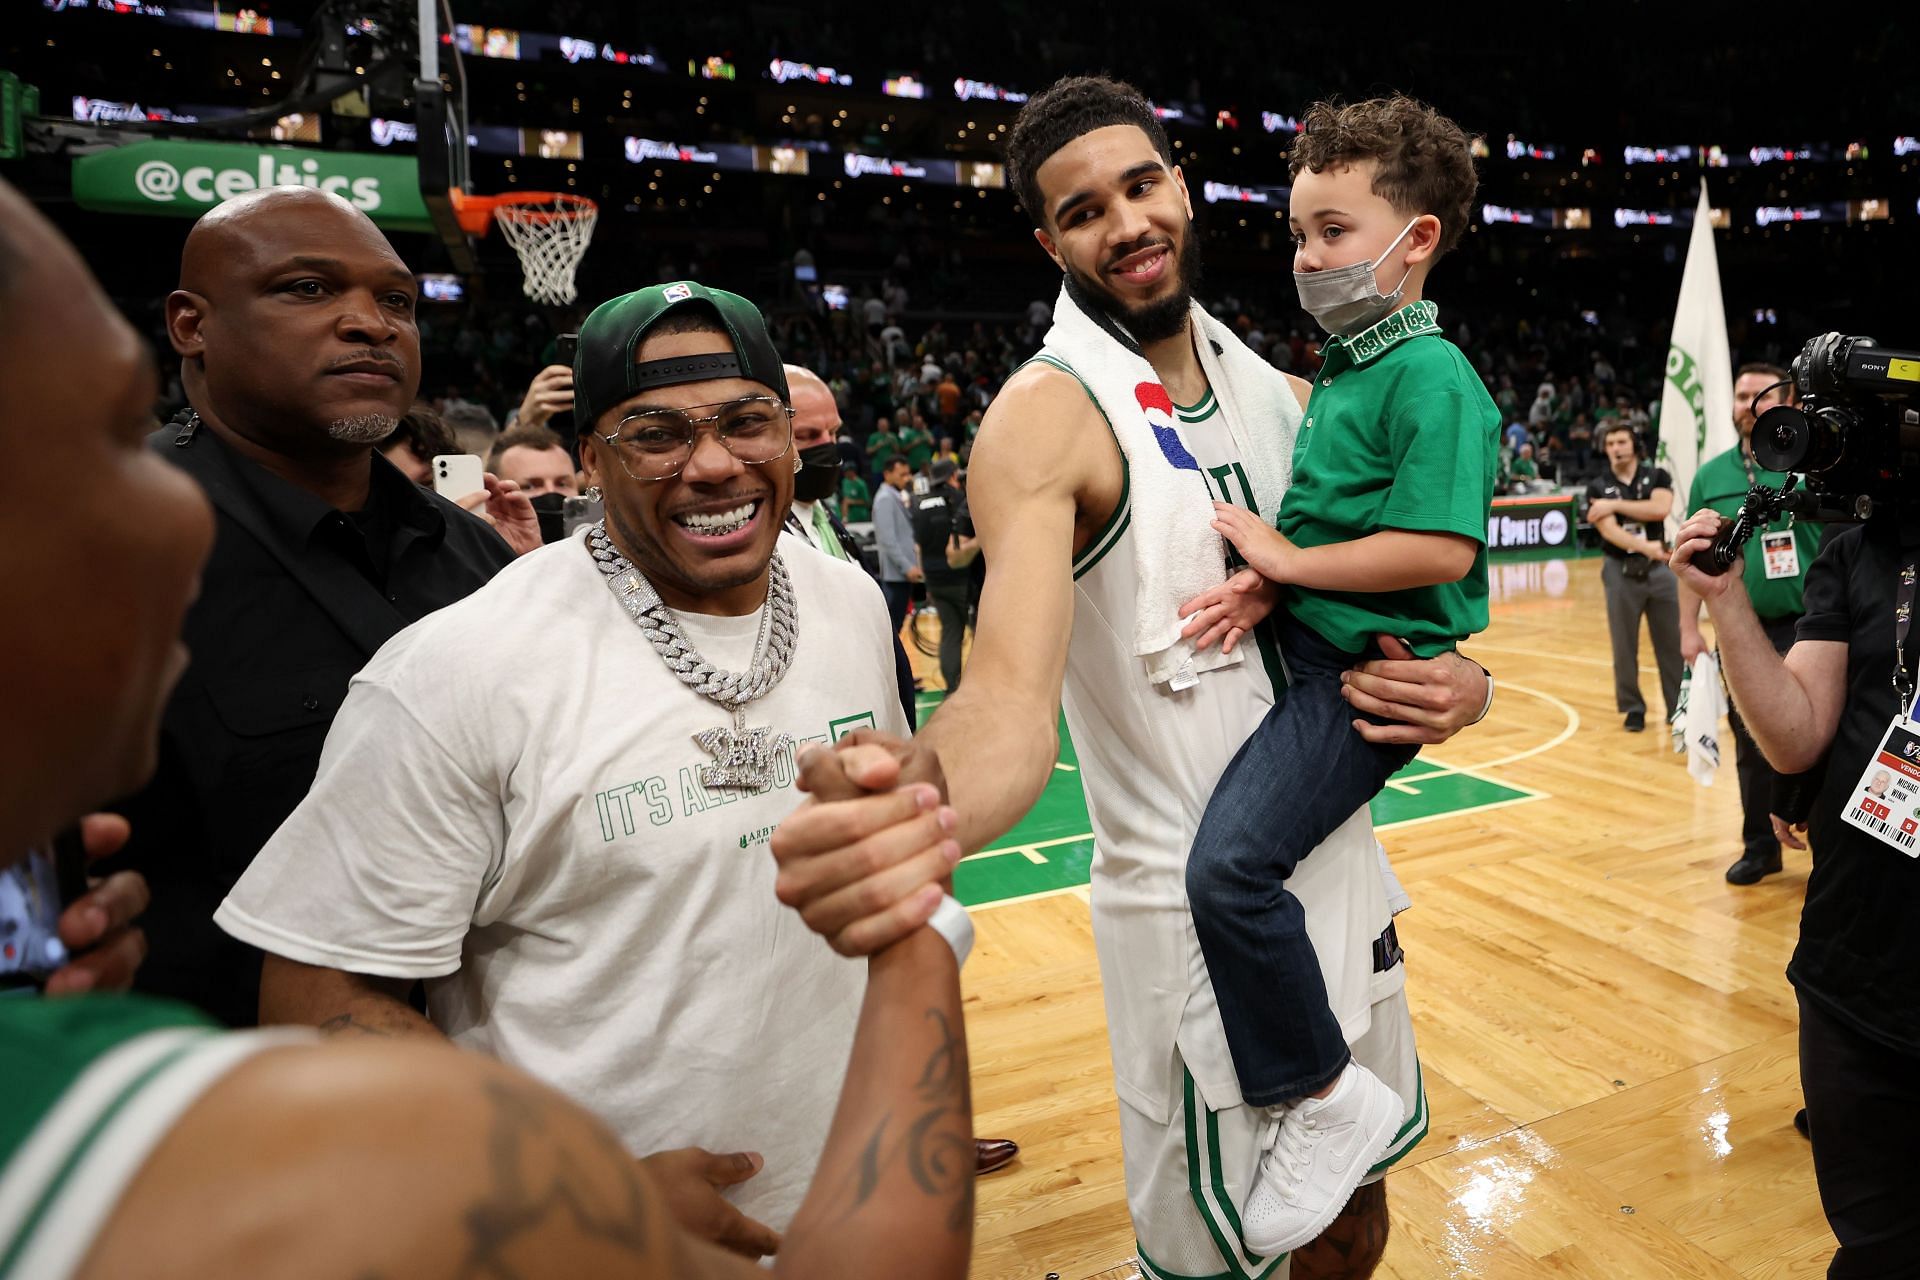 NBA - A letter from Jayson Tatum to Deuce. #FathersDay